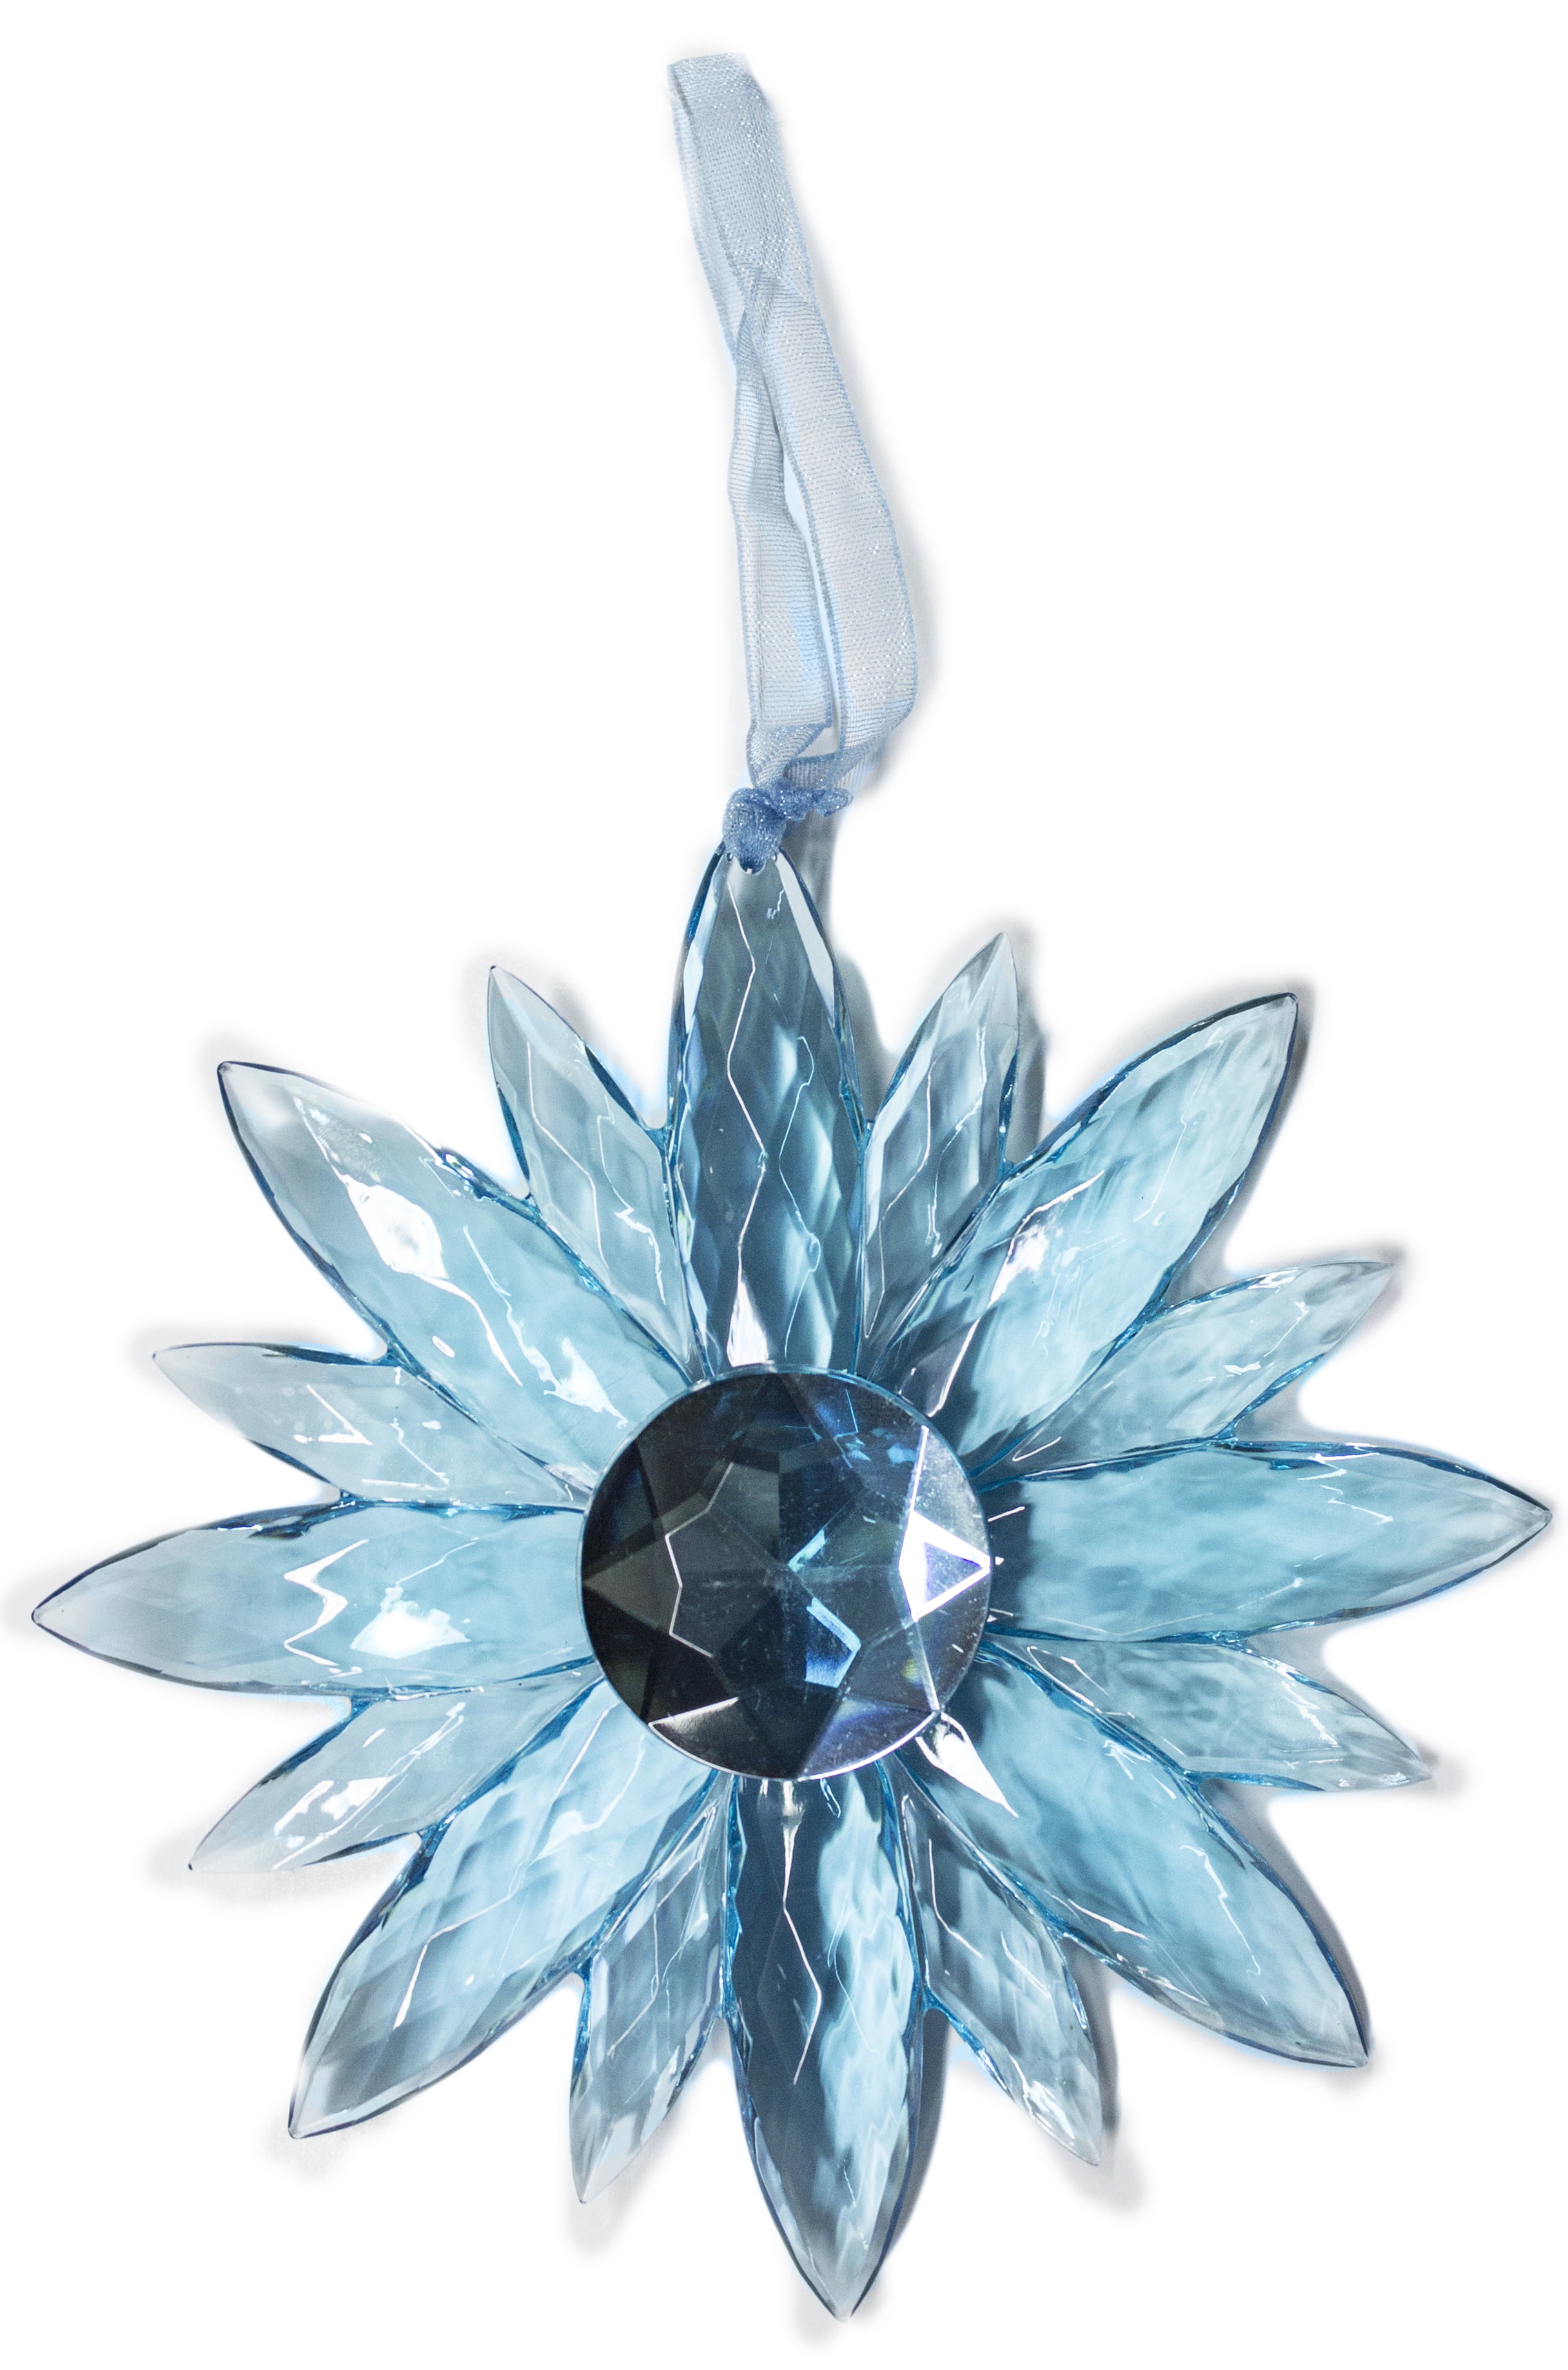 JEWEL FLOWER ORNAMENT CRYSTAL EXPESSION  BY GANZ VARIETY OF COLORS 